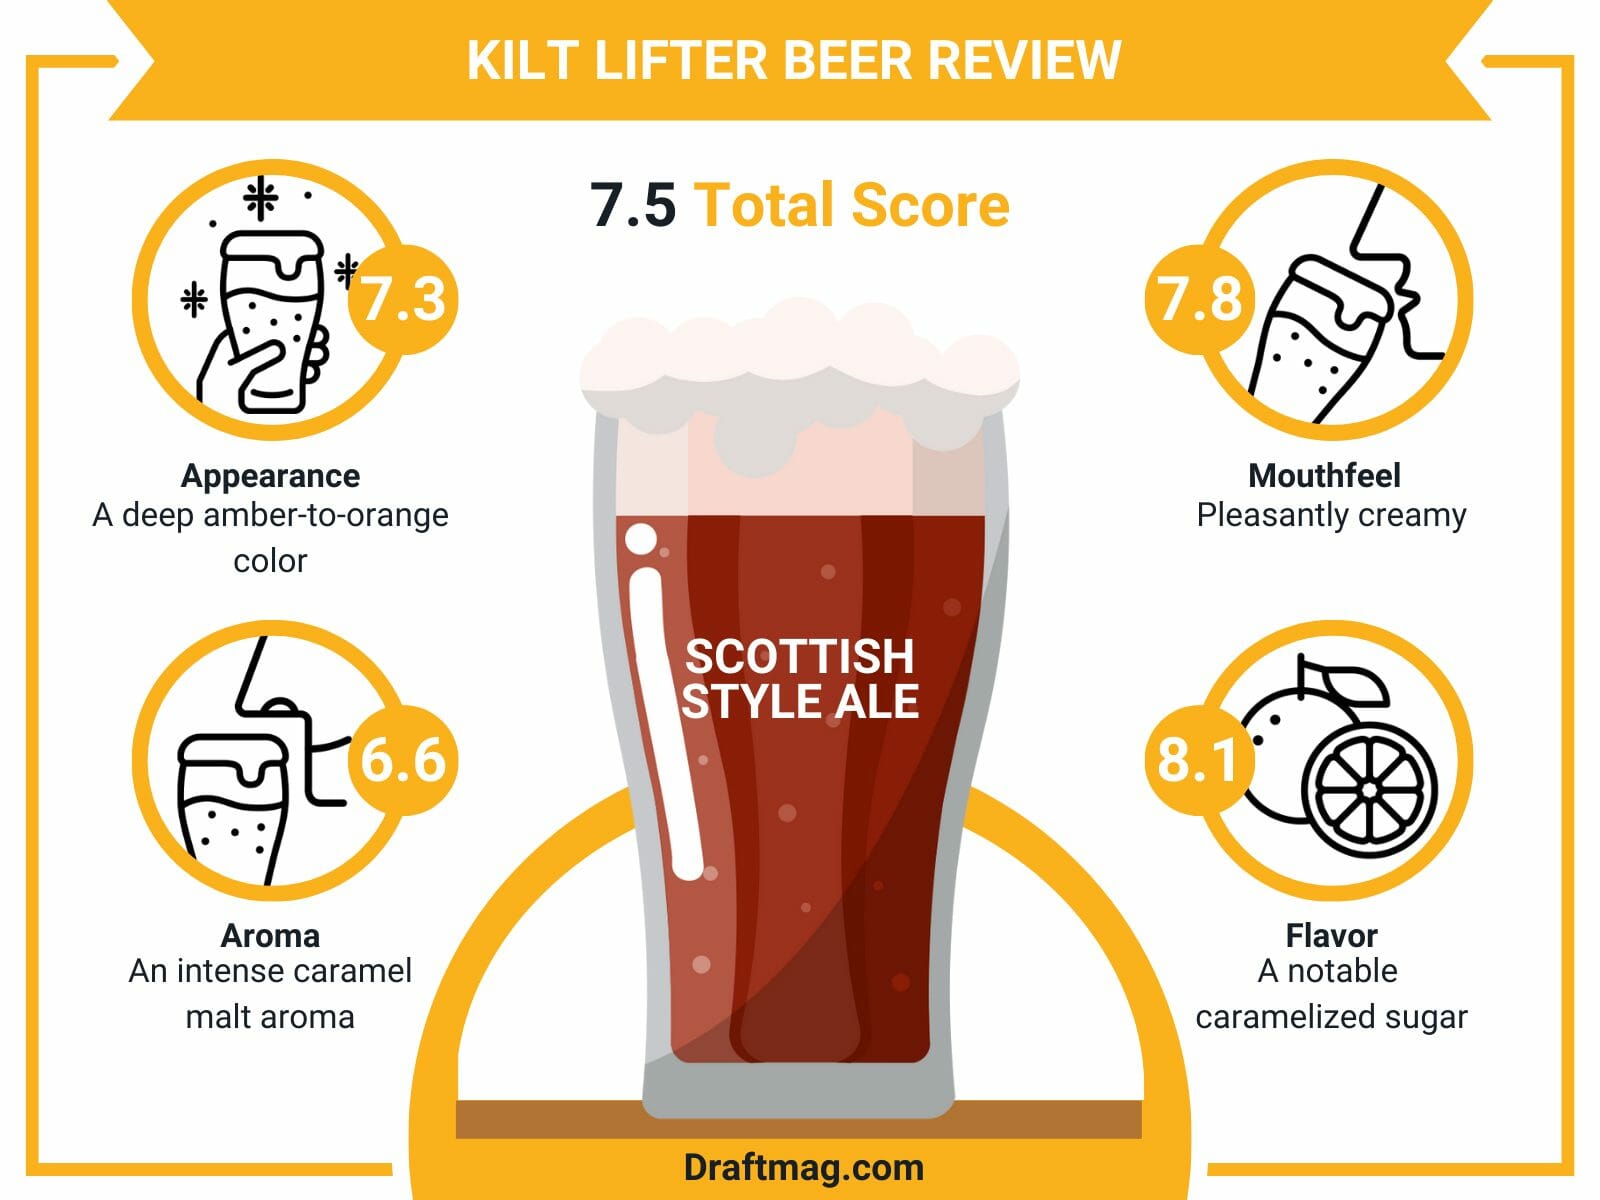 Kilt lifter beer review infographic